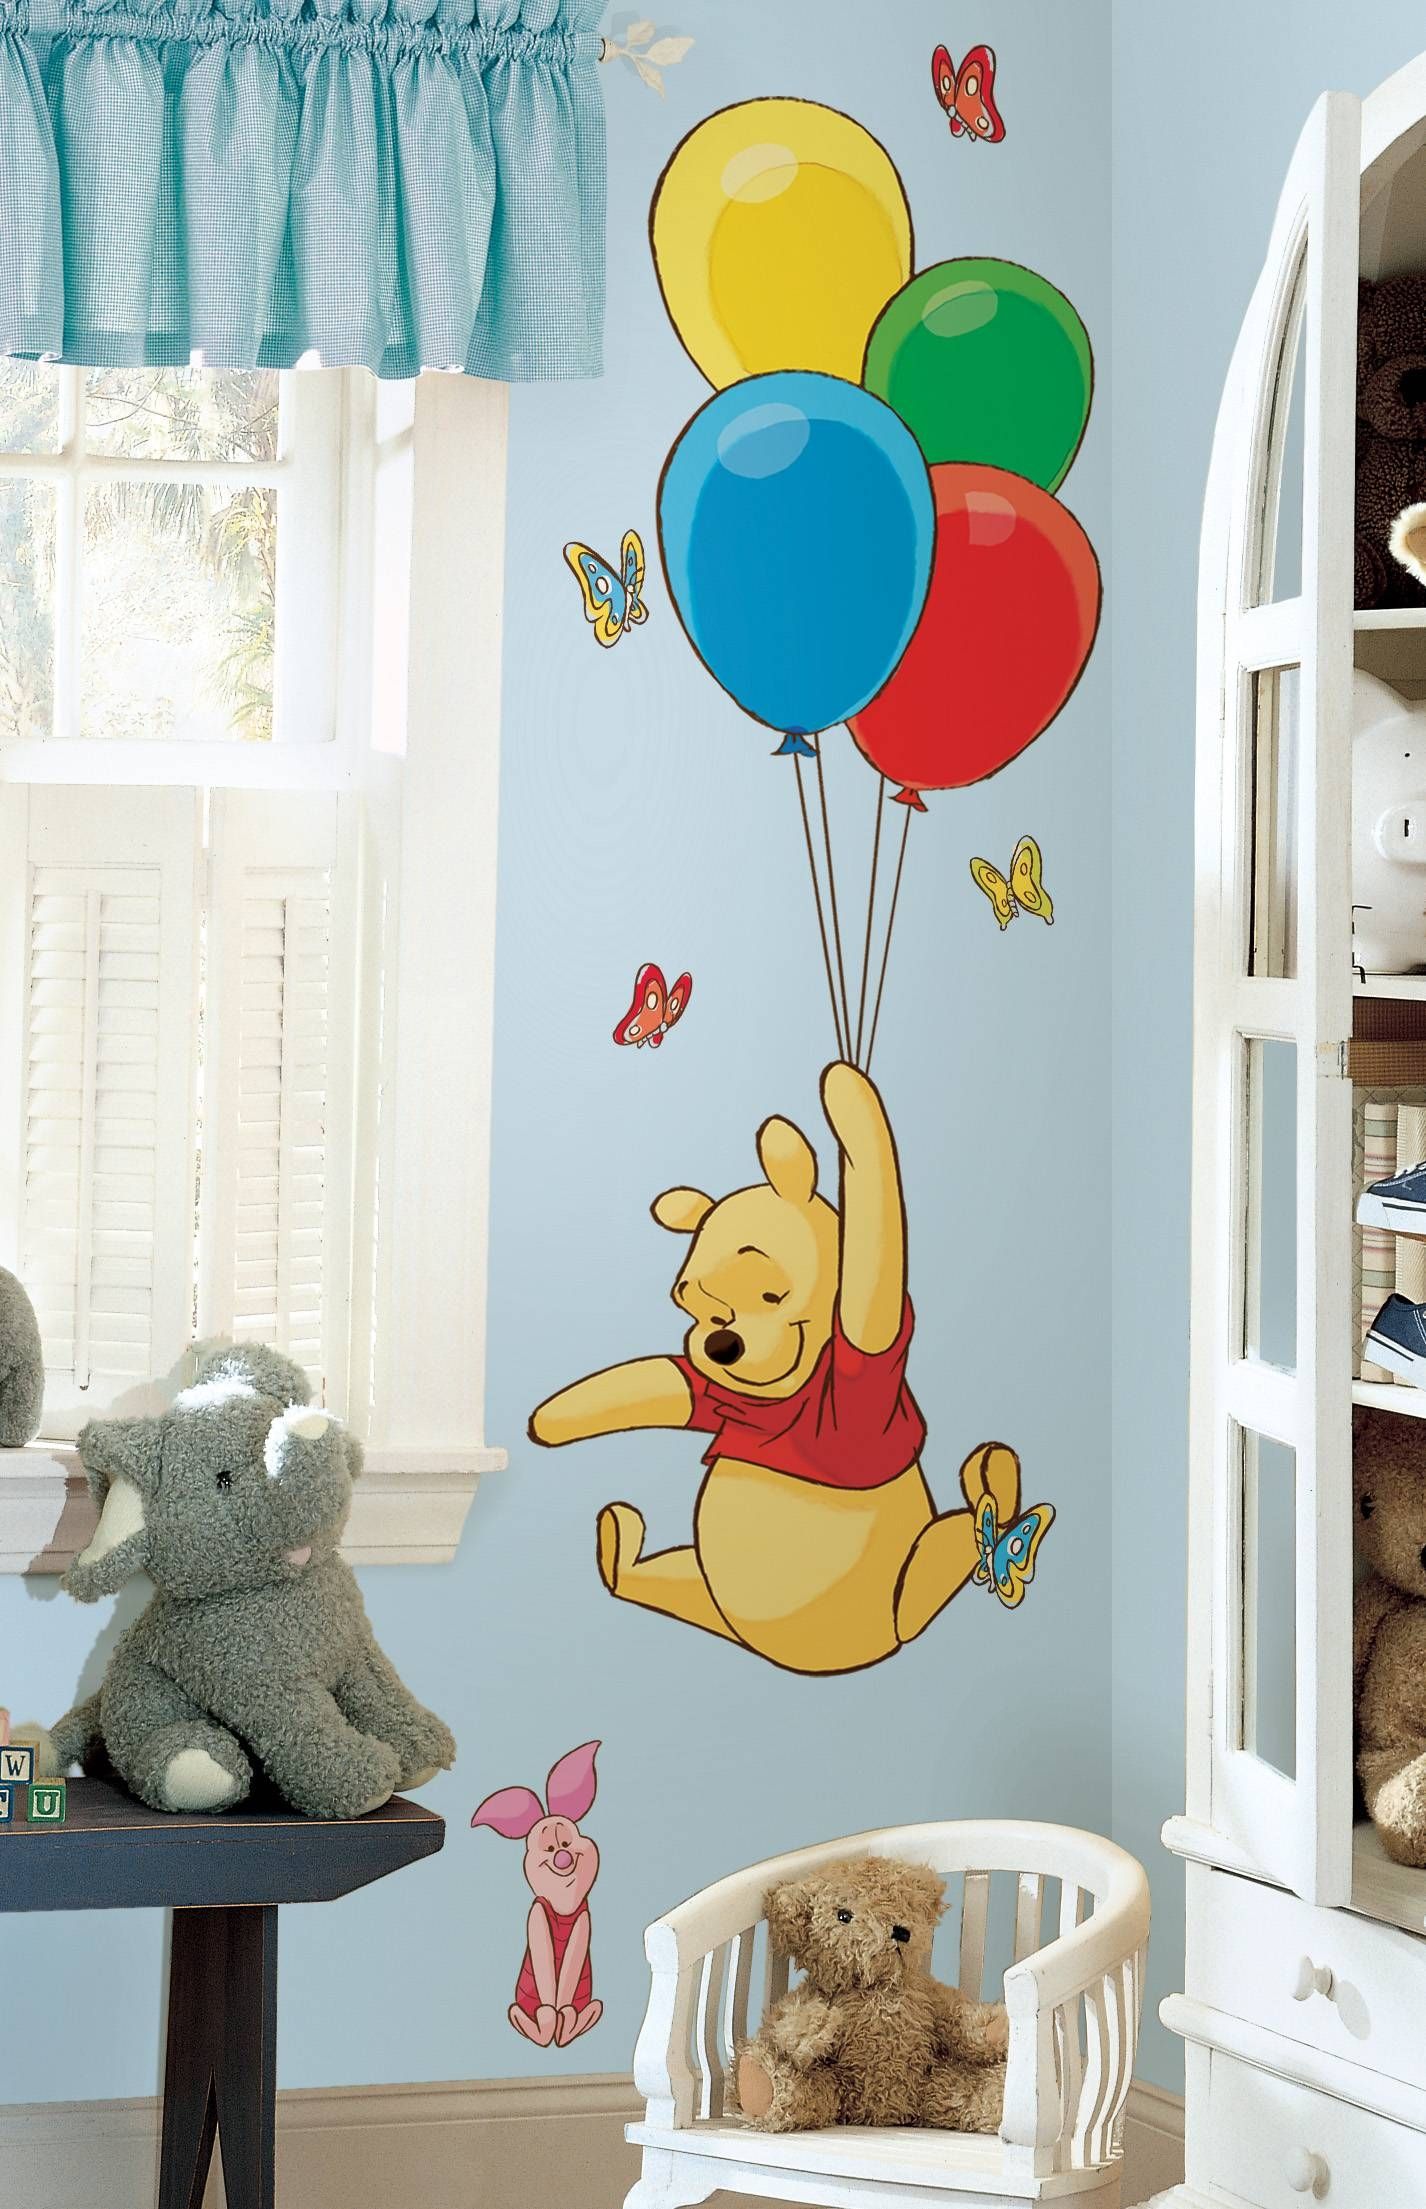 Decorating A Nursery With Winnie The Pooh With Latest Winnie The Pooh Wall Decor (View 1 of 20)